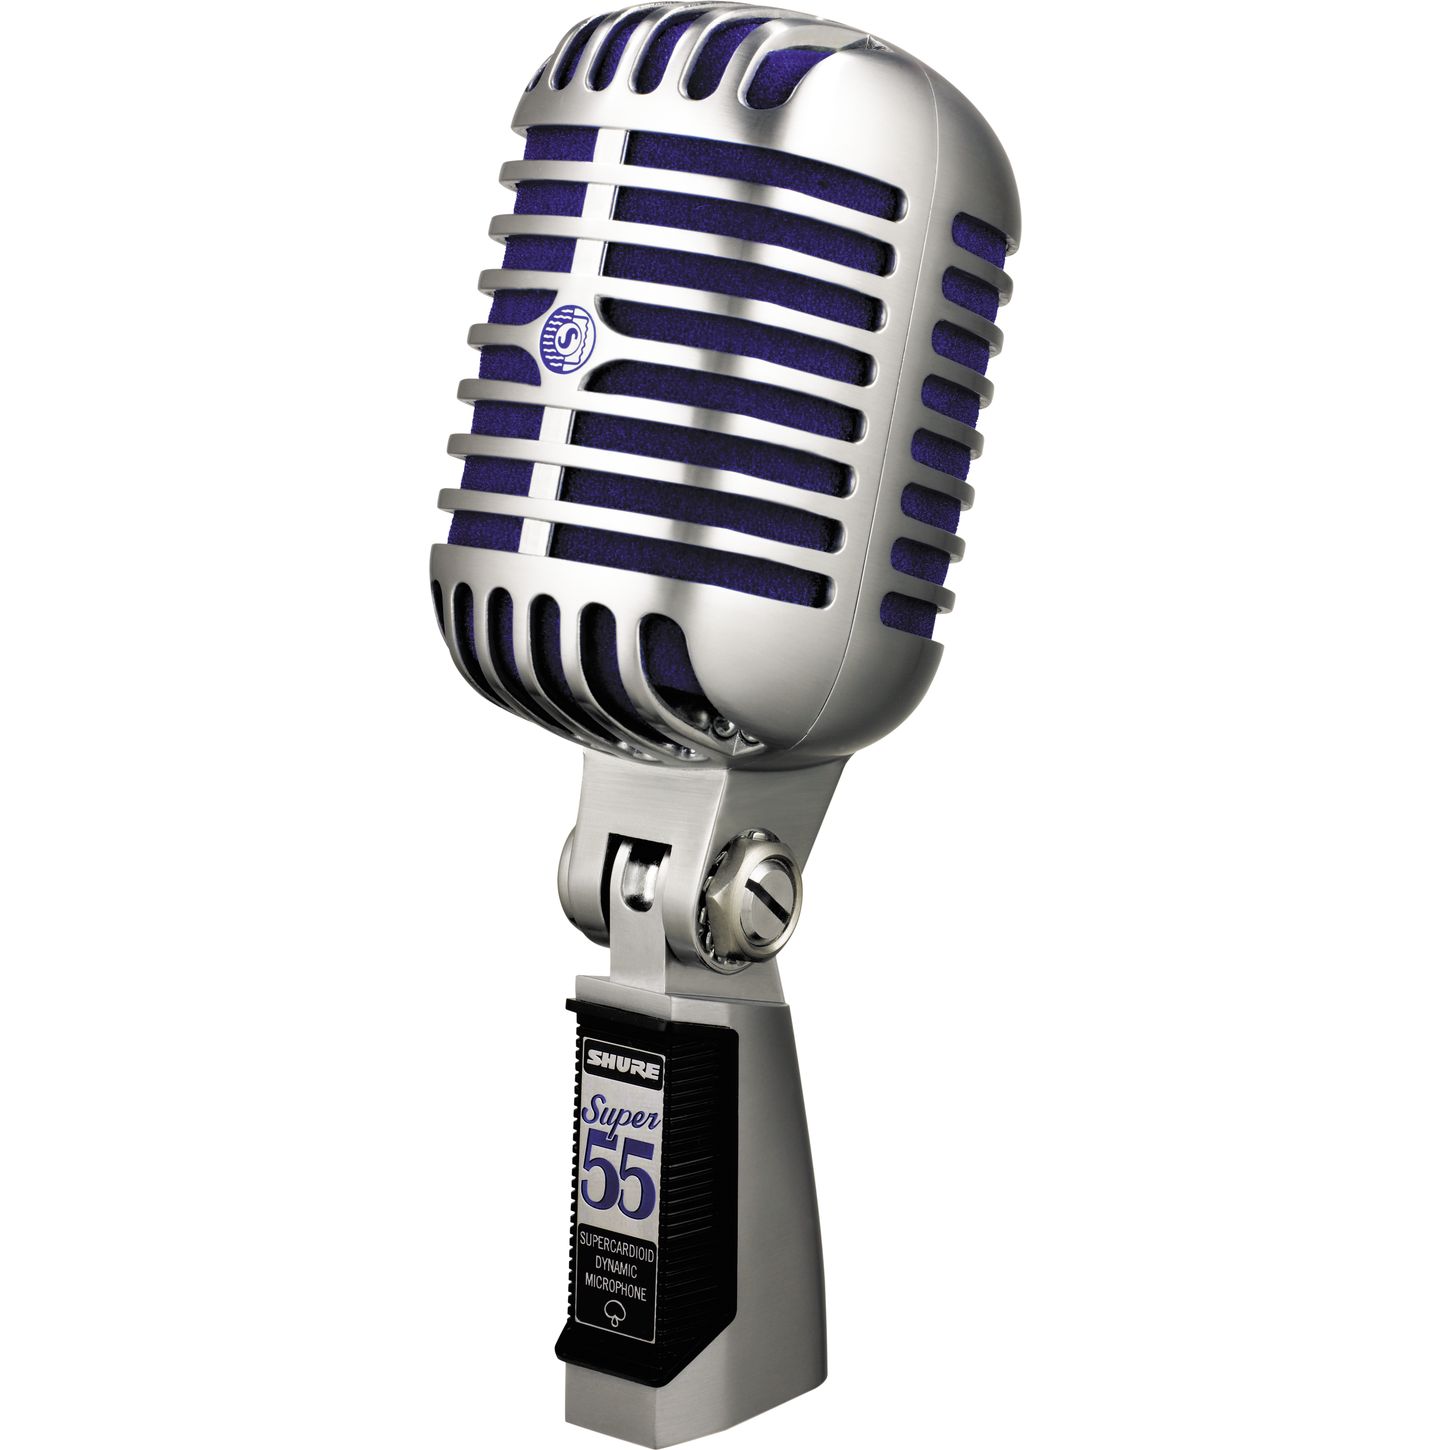 Microphone Png Image PNG Imag